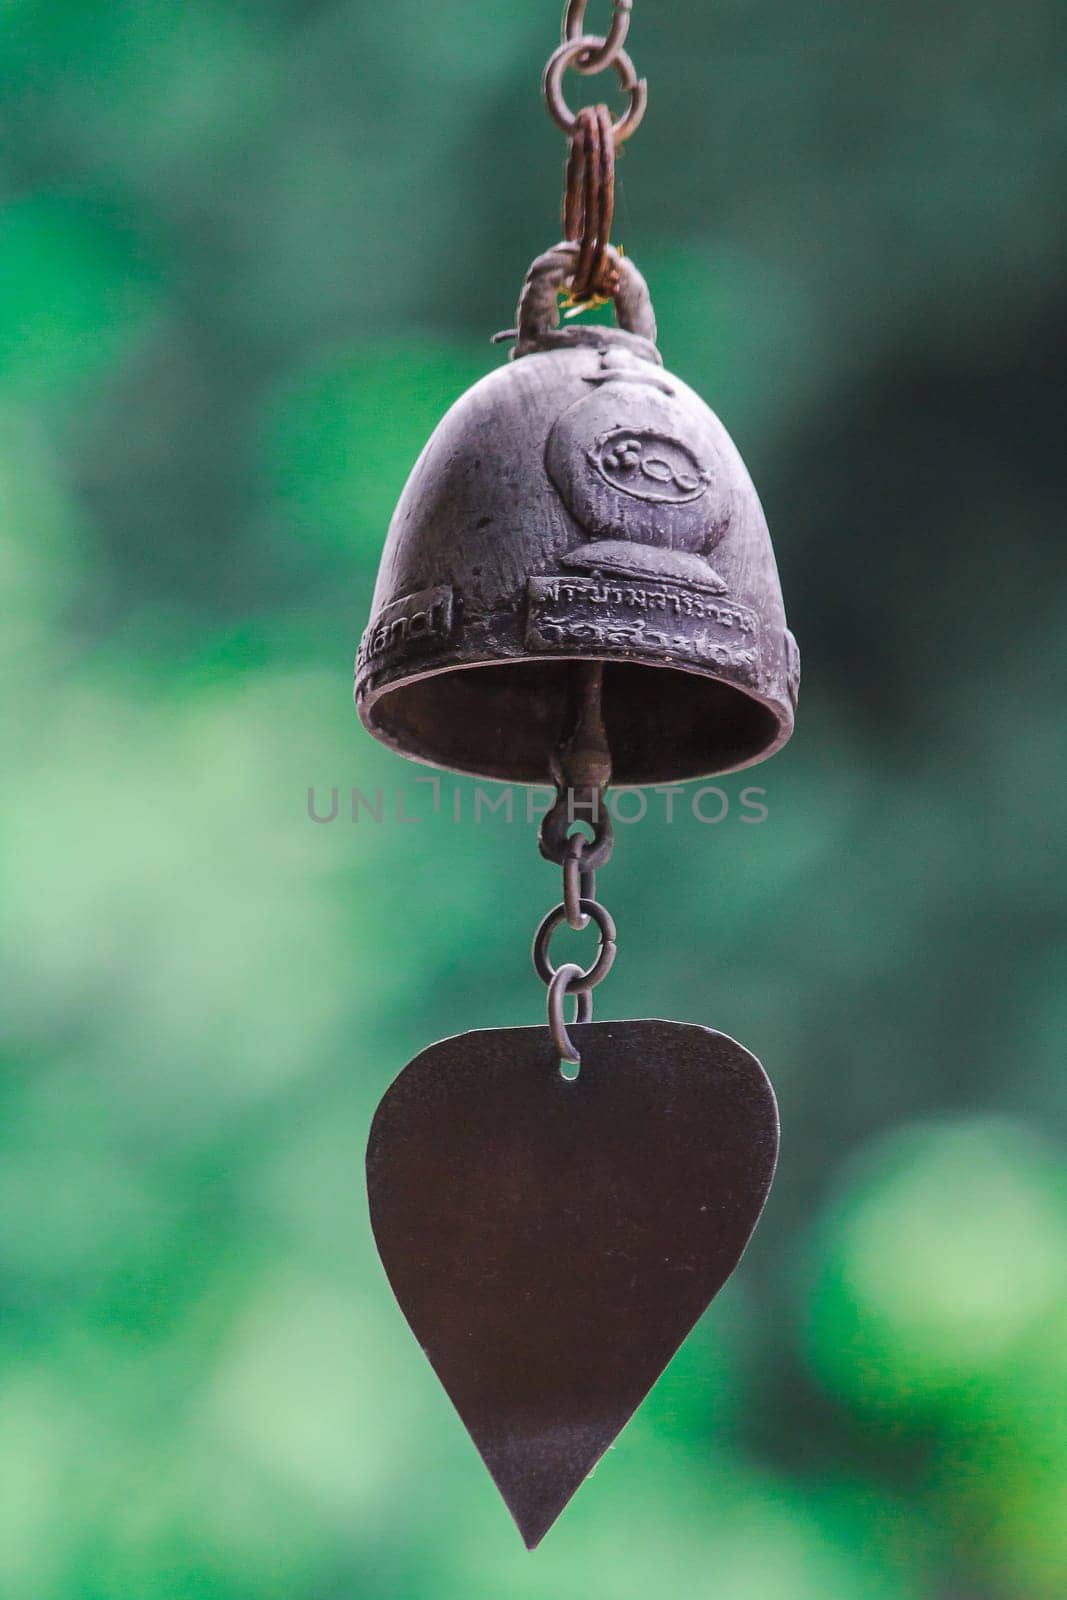 Small brass bells are commonly hung in Thai temples.